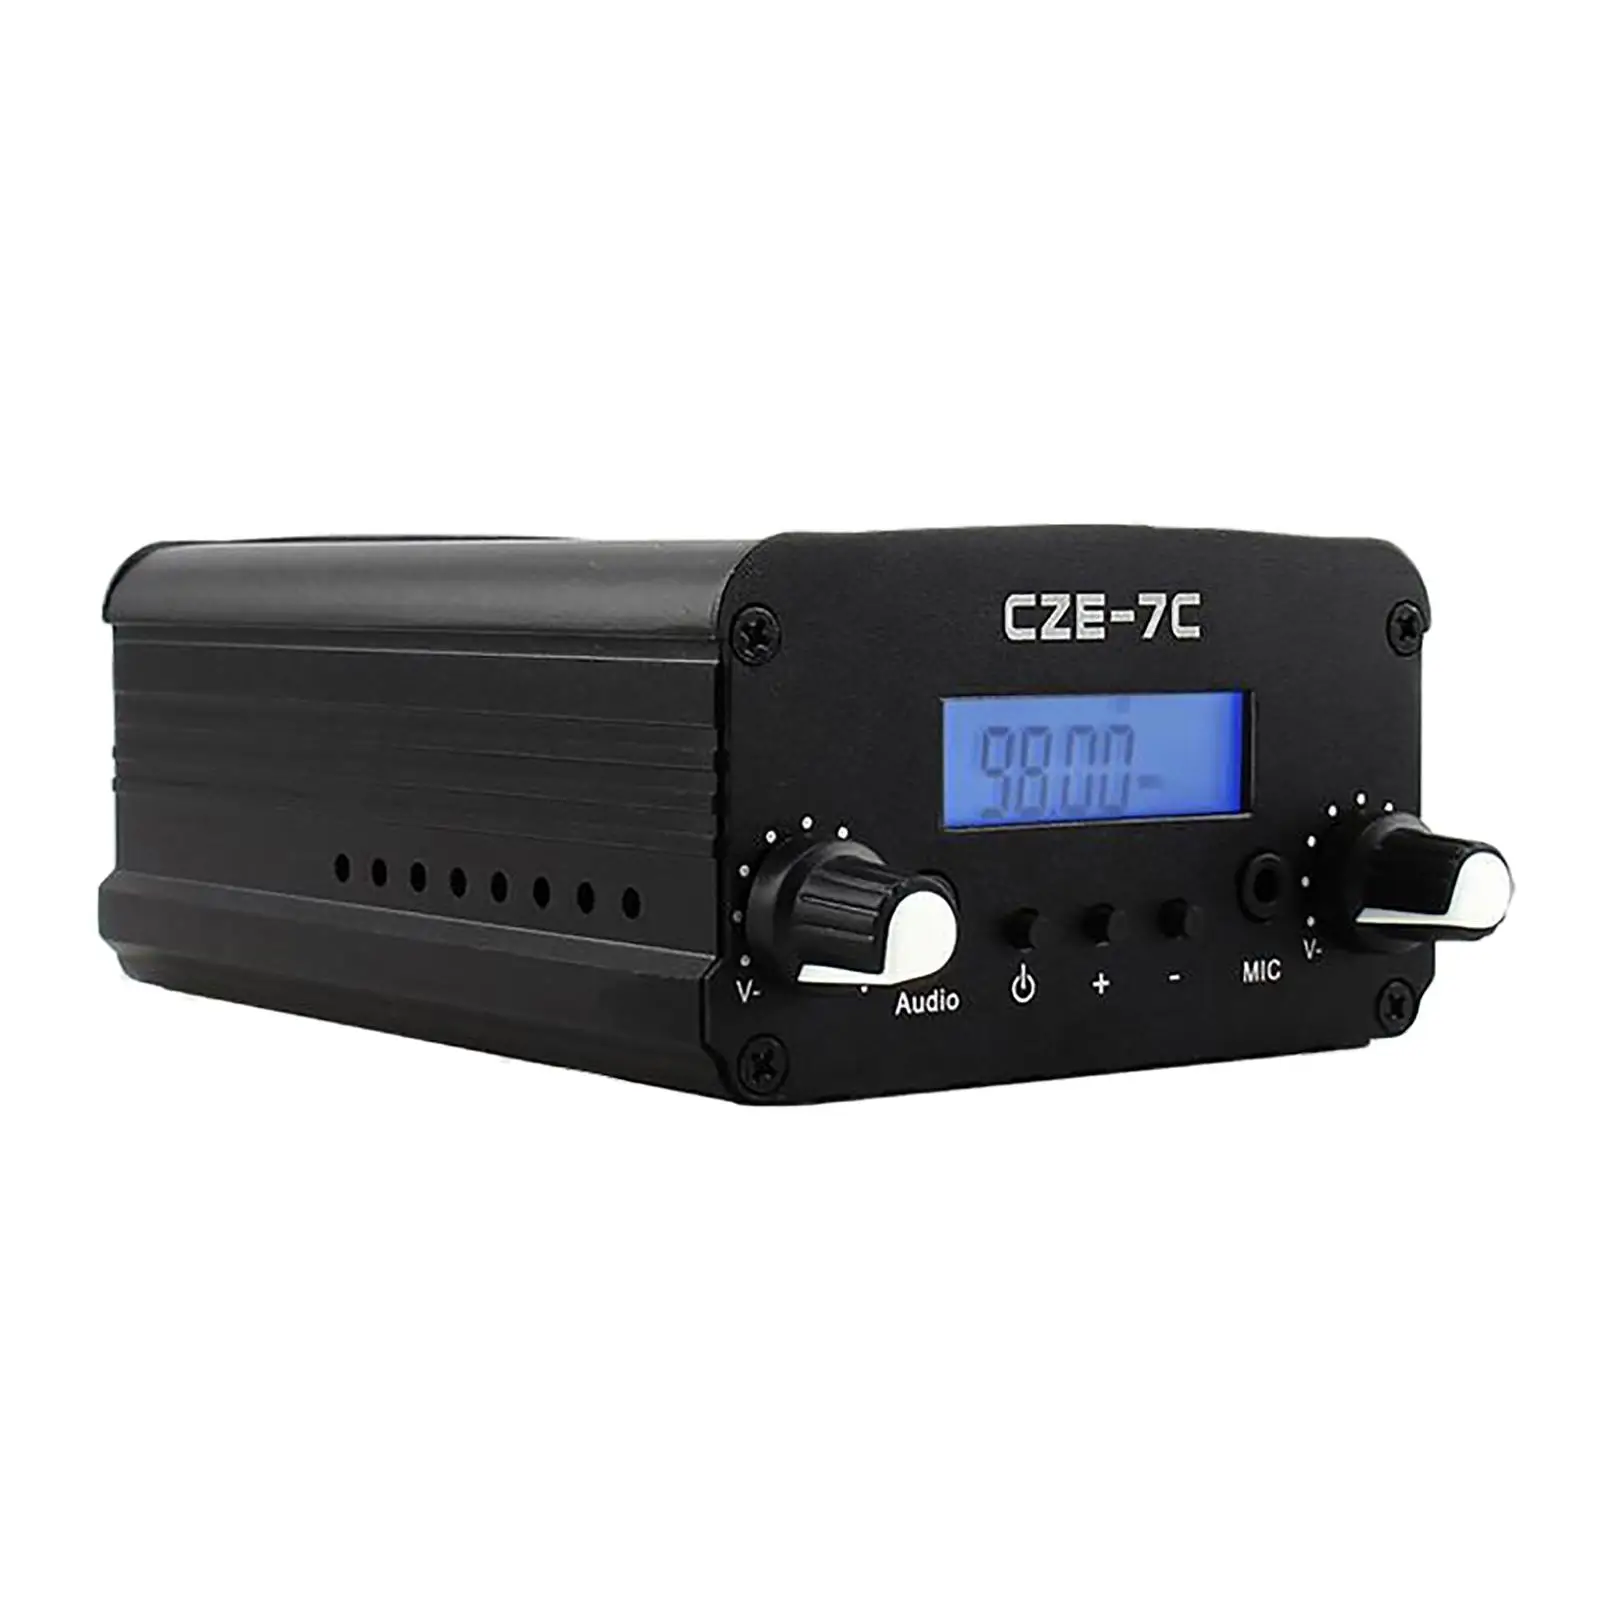 Wireless radio Transmitters NC FM Stereo Black Frequency 76-108MHz for Broadcast Station